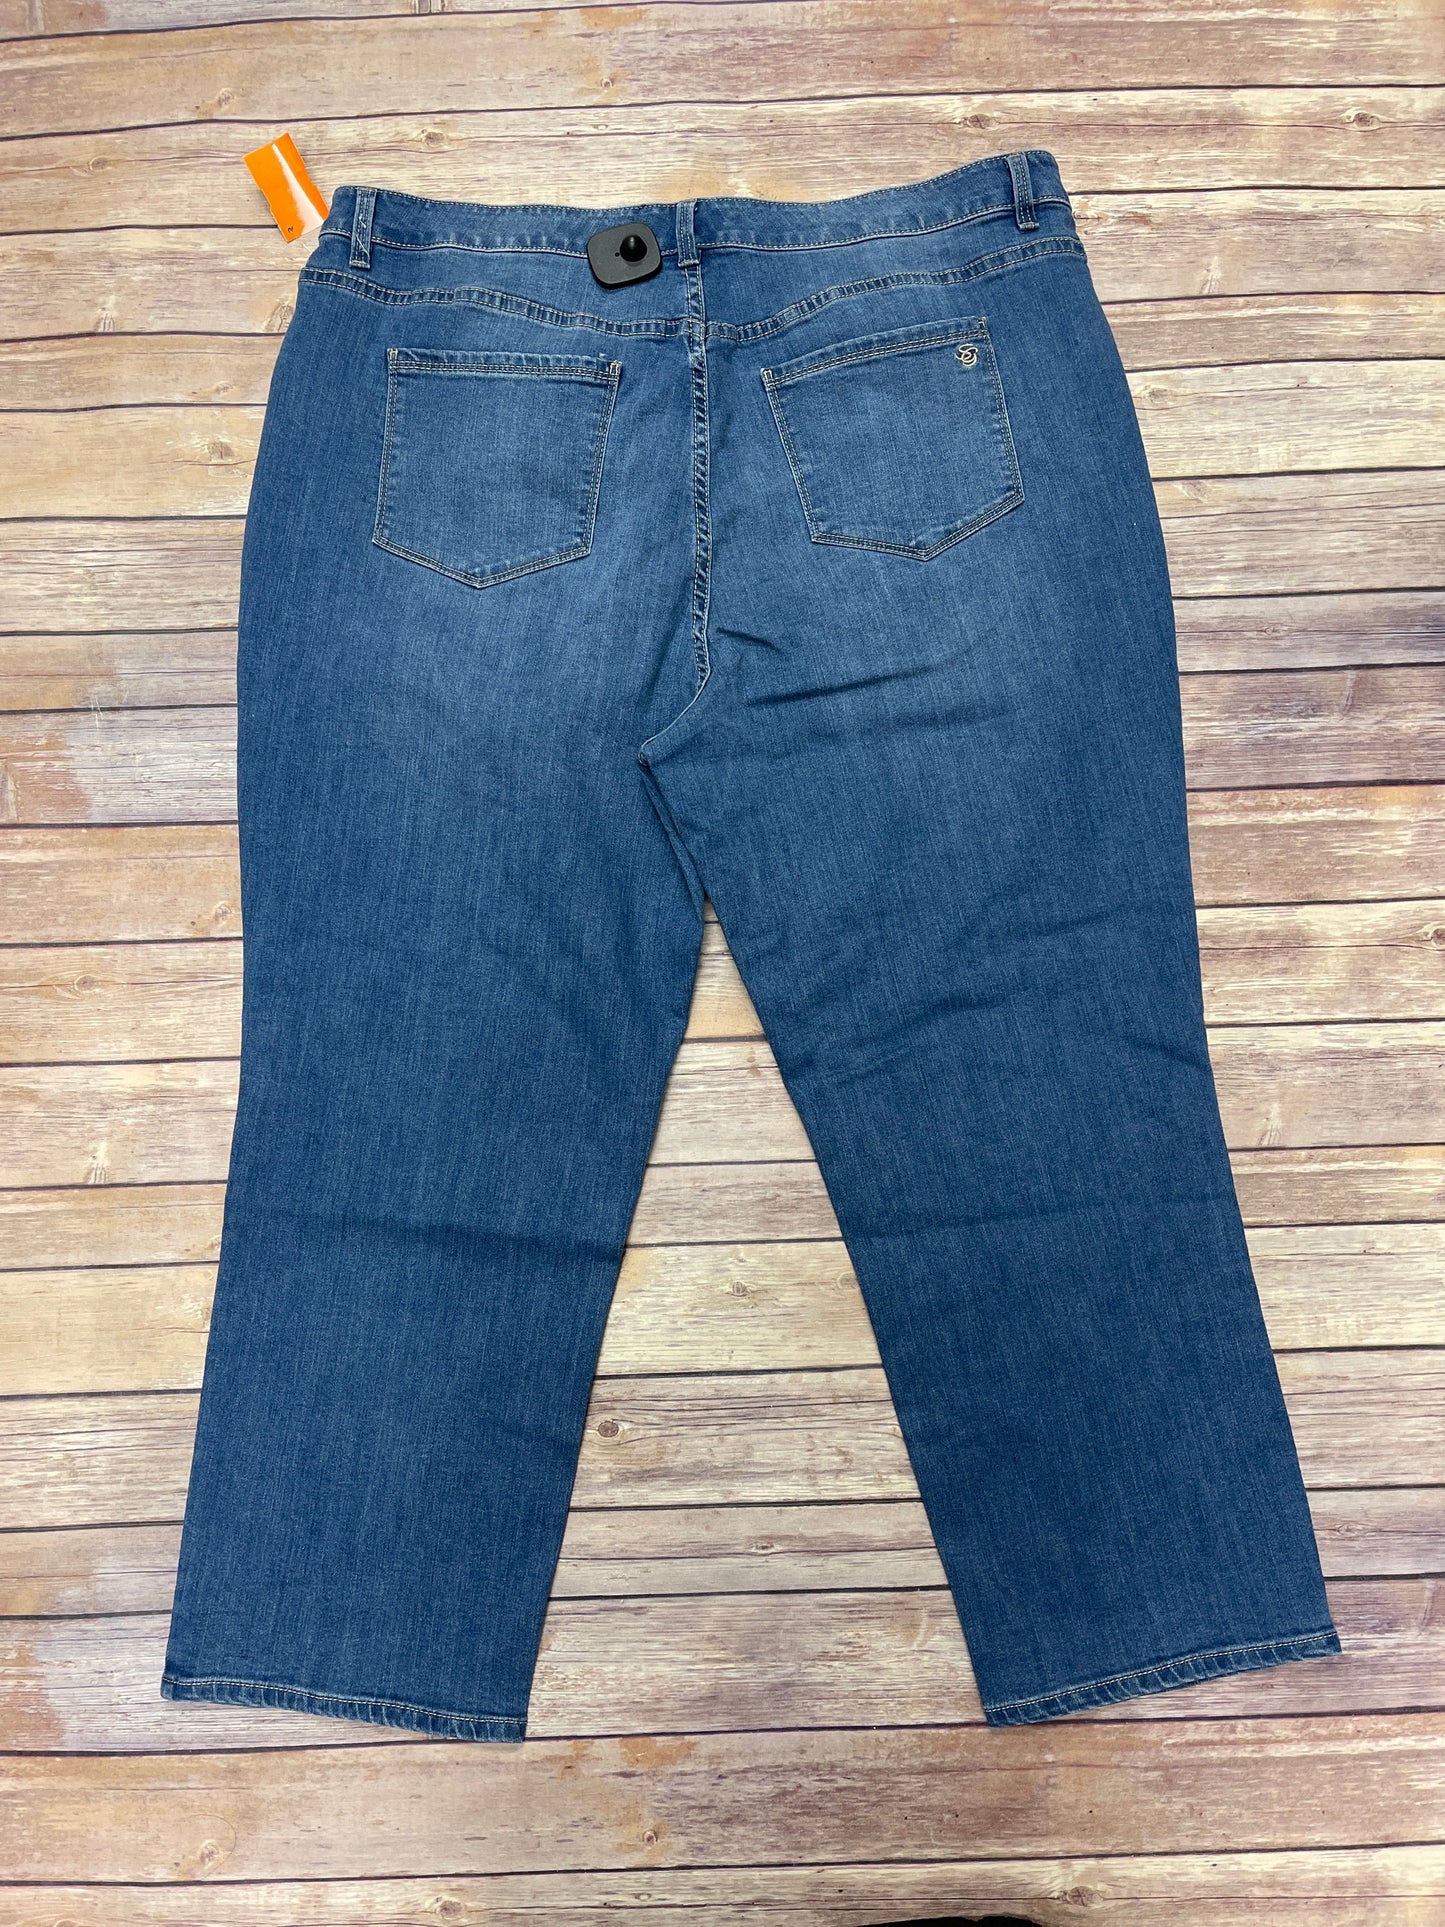 Jeans Straight By Susan Graver  Size: 20w